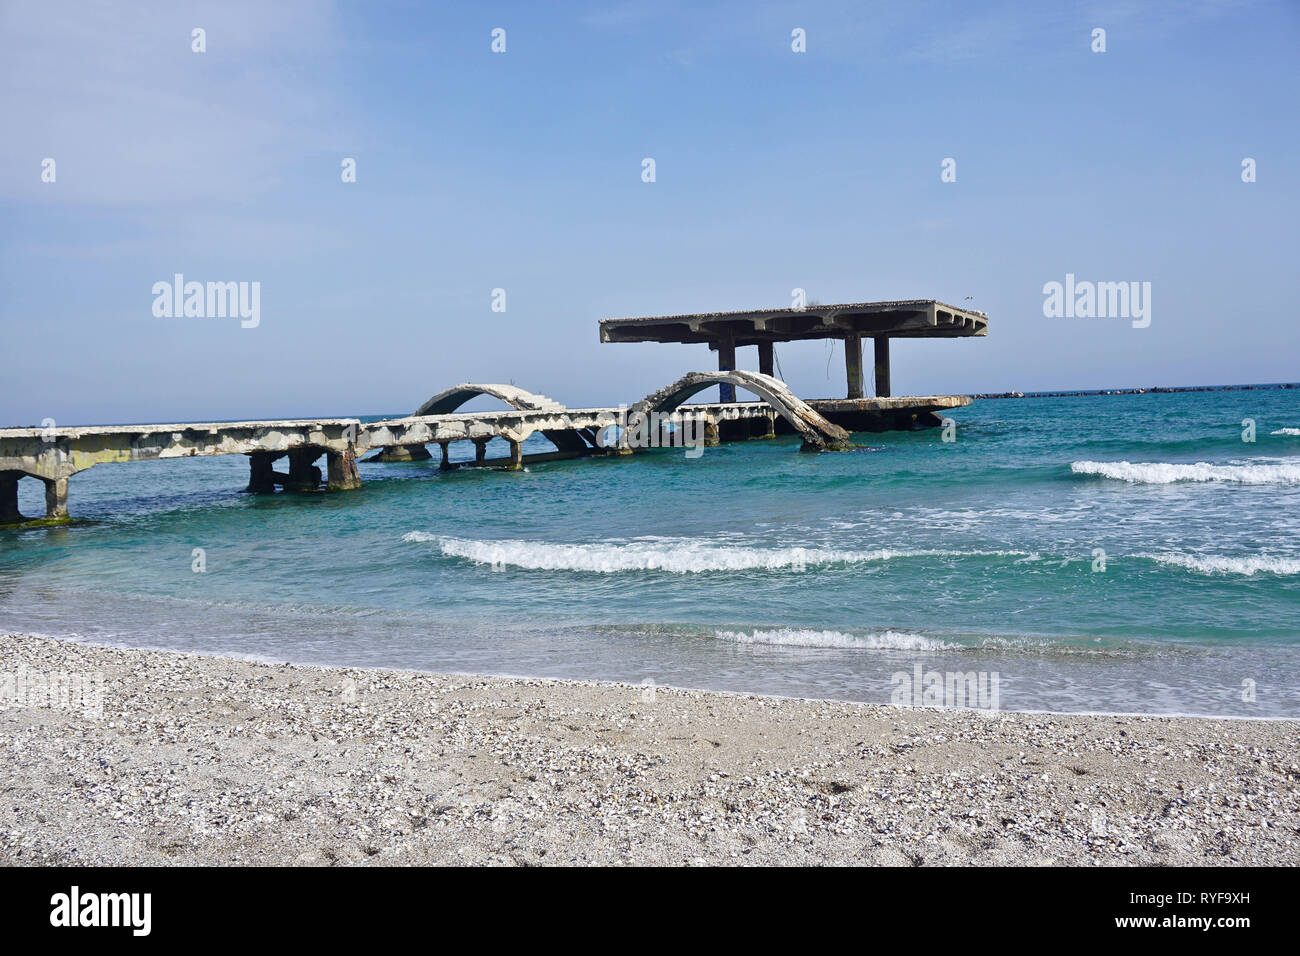 Post cards, Black Sea, blue waters and old buildings Stock Photo